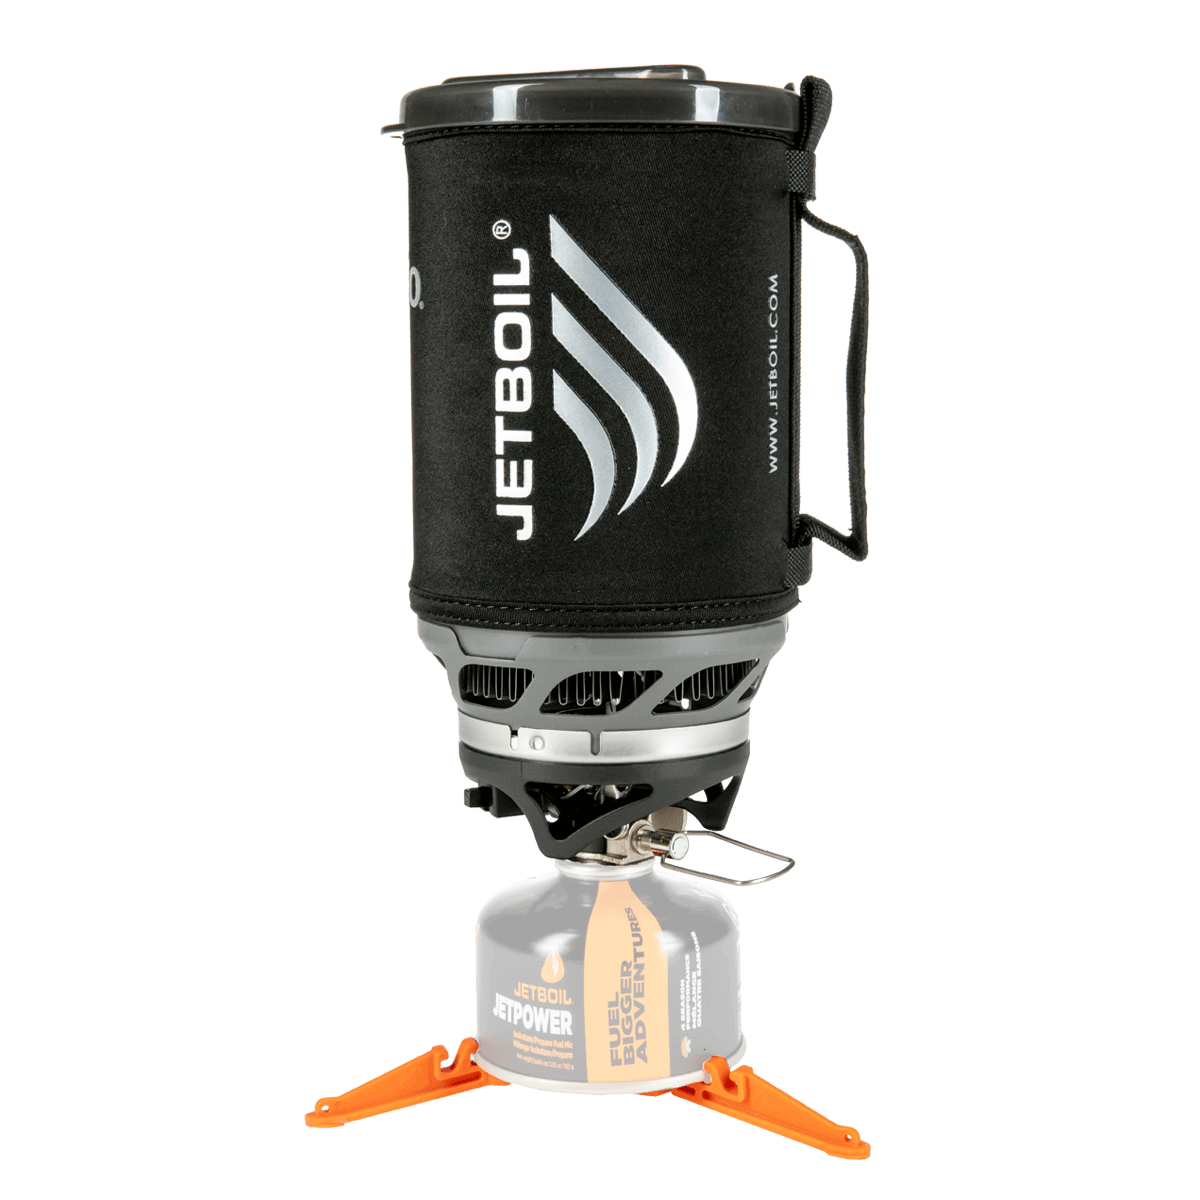 Jetboil Sumo Gas Stove